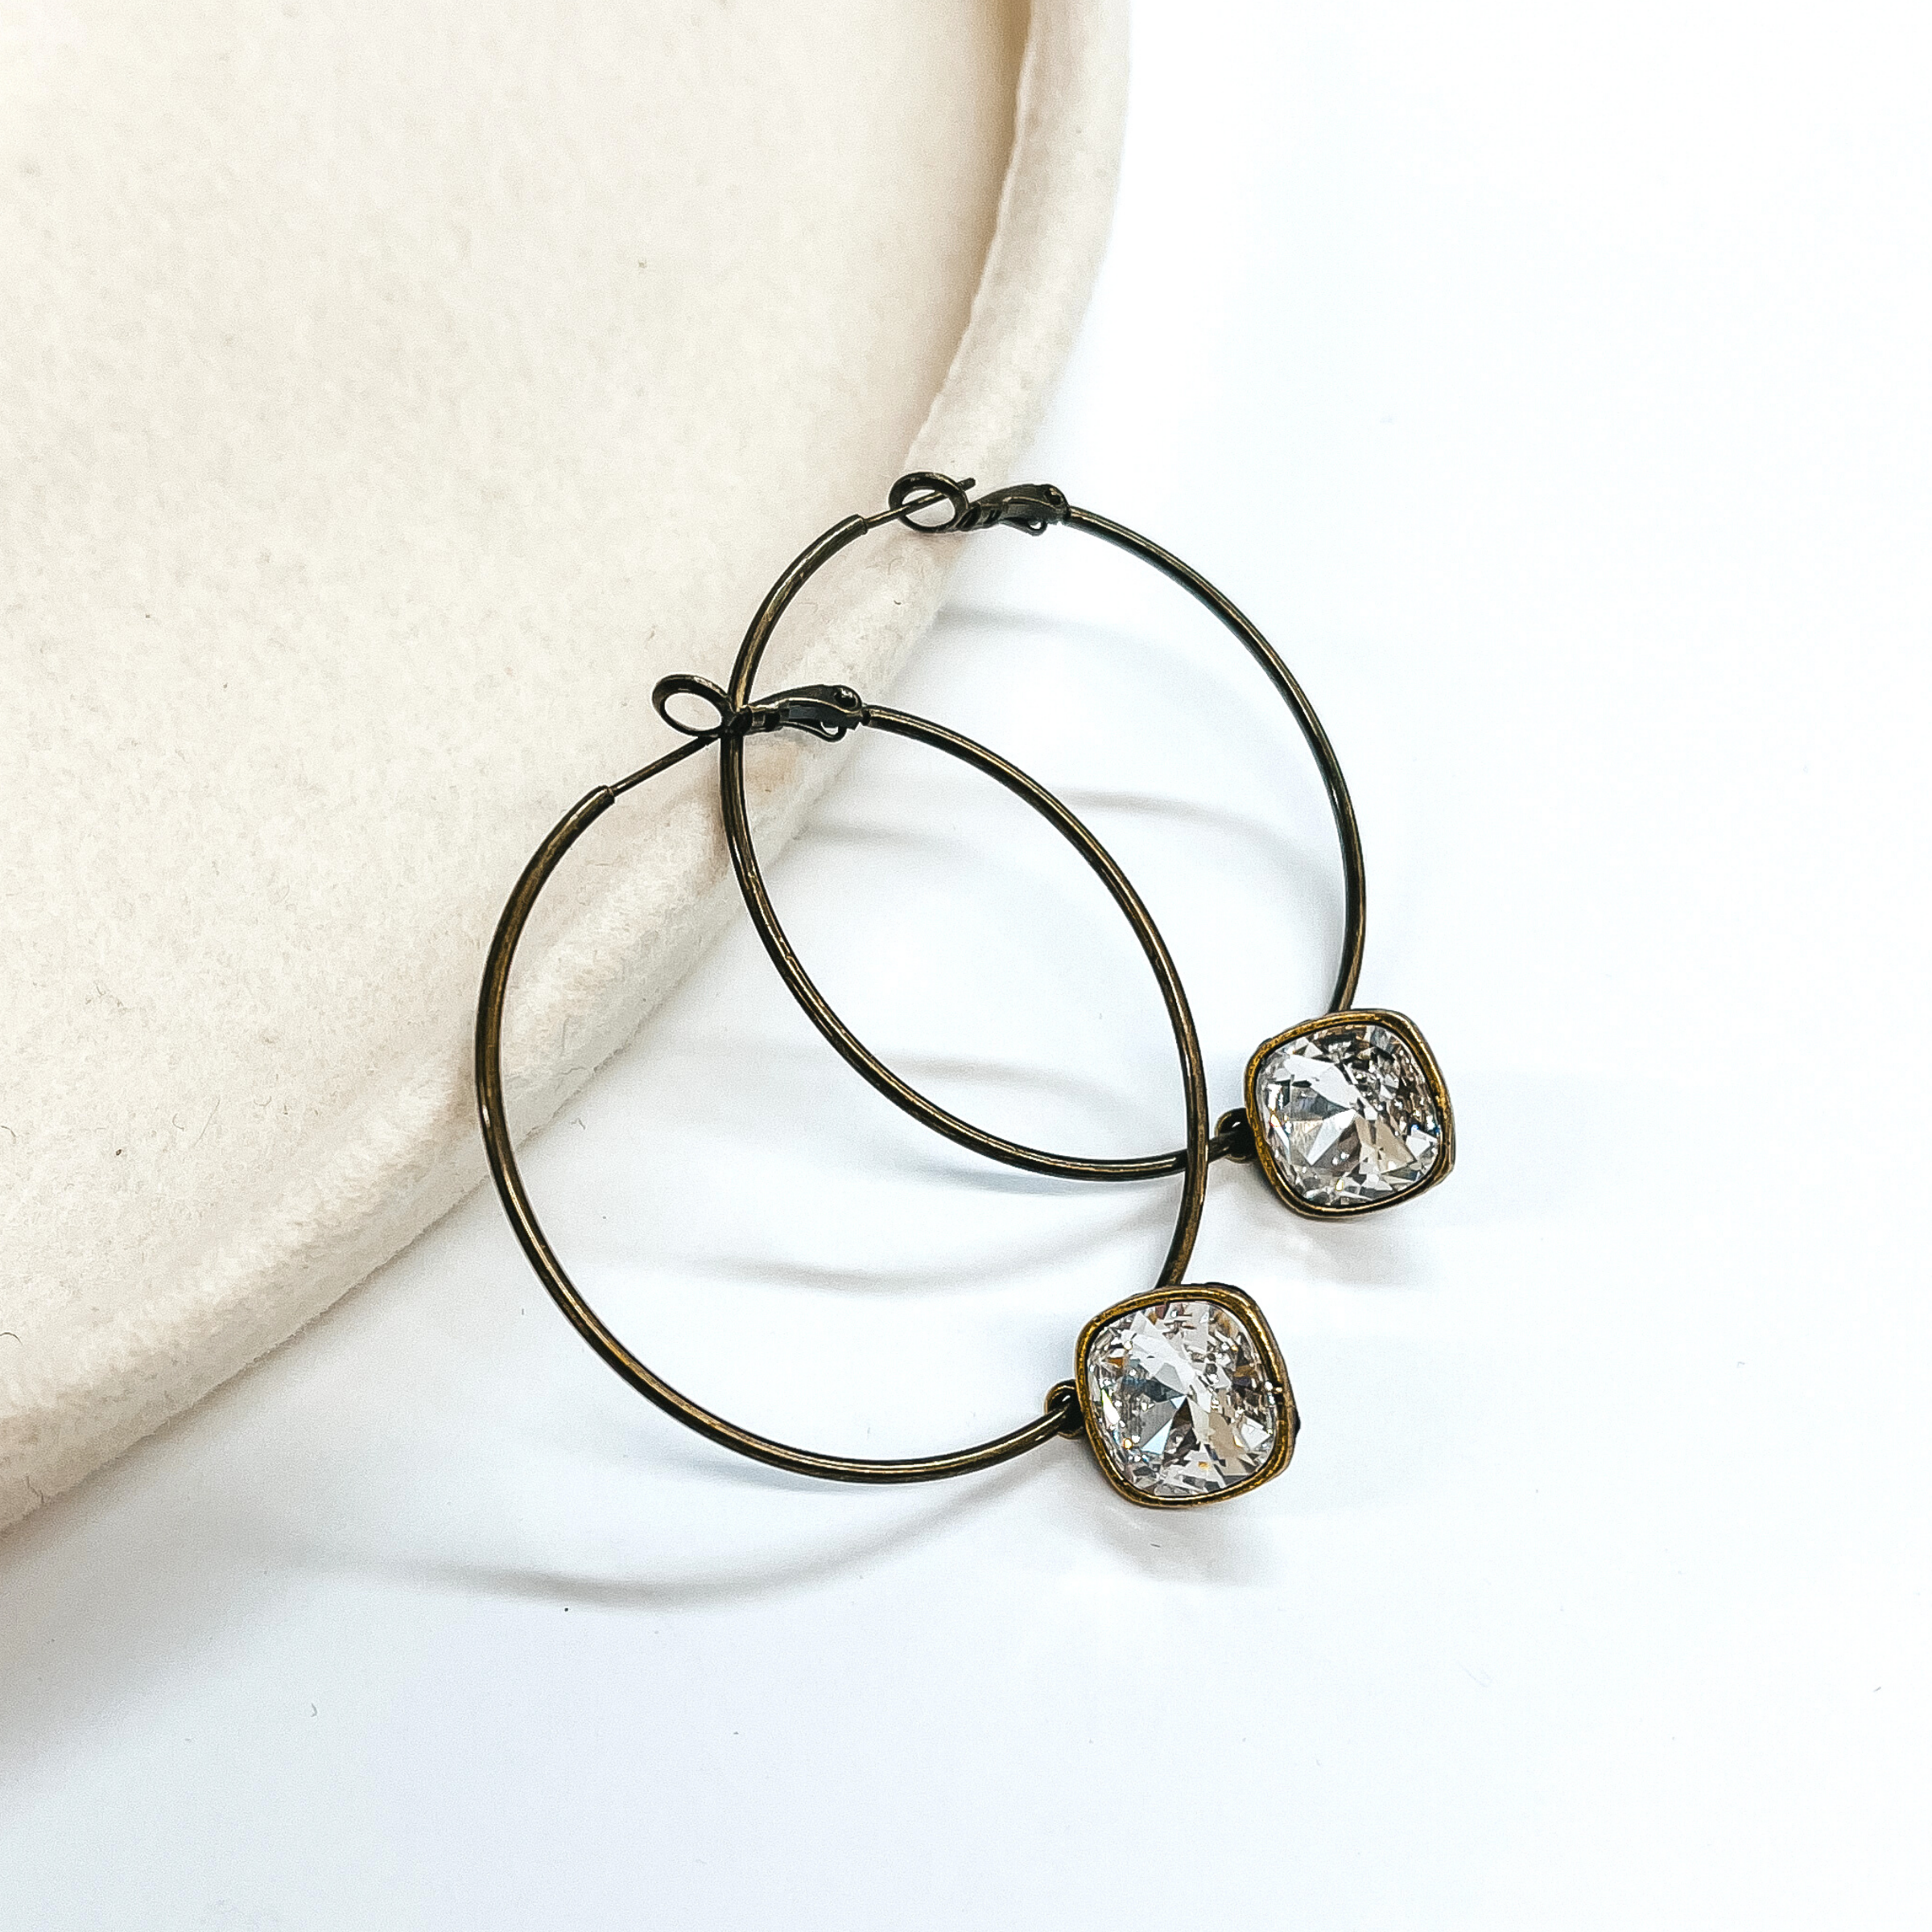 Pink Panache | Large Bronze Hoop Earrings with Clear Cushion Cut Crystals in Square Setting - Giddy Up Glamour Boutique